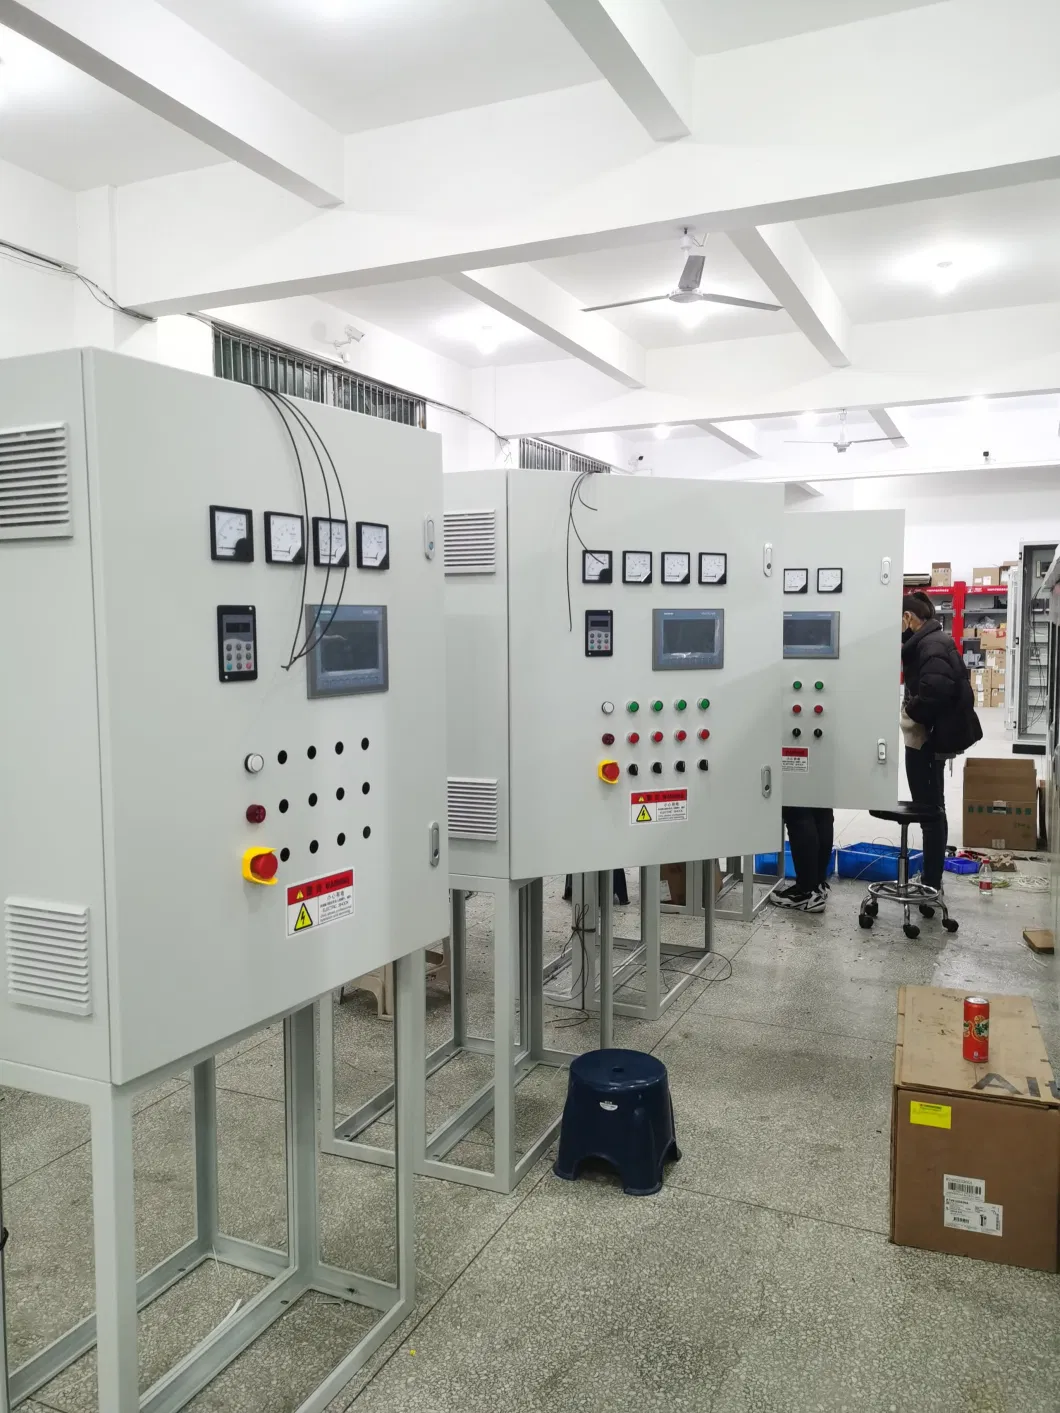 Manufacture Single Three Phase Electrical Power Distribution Panel Boards